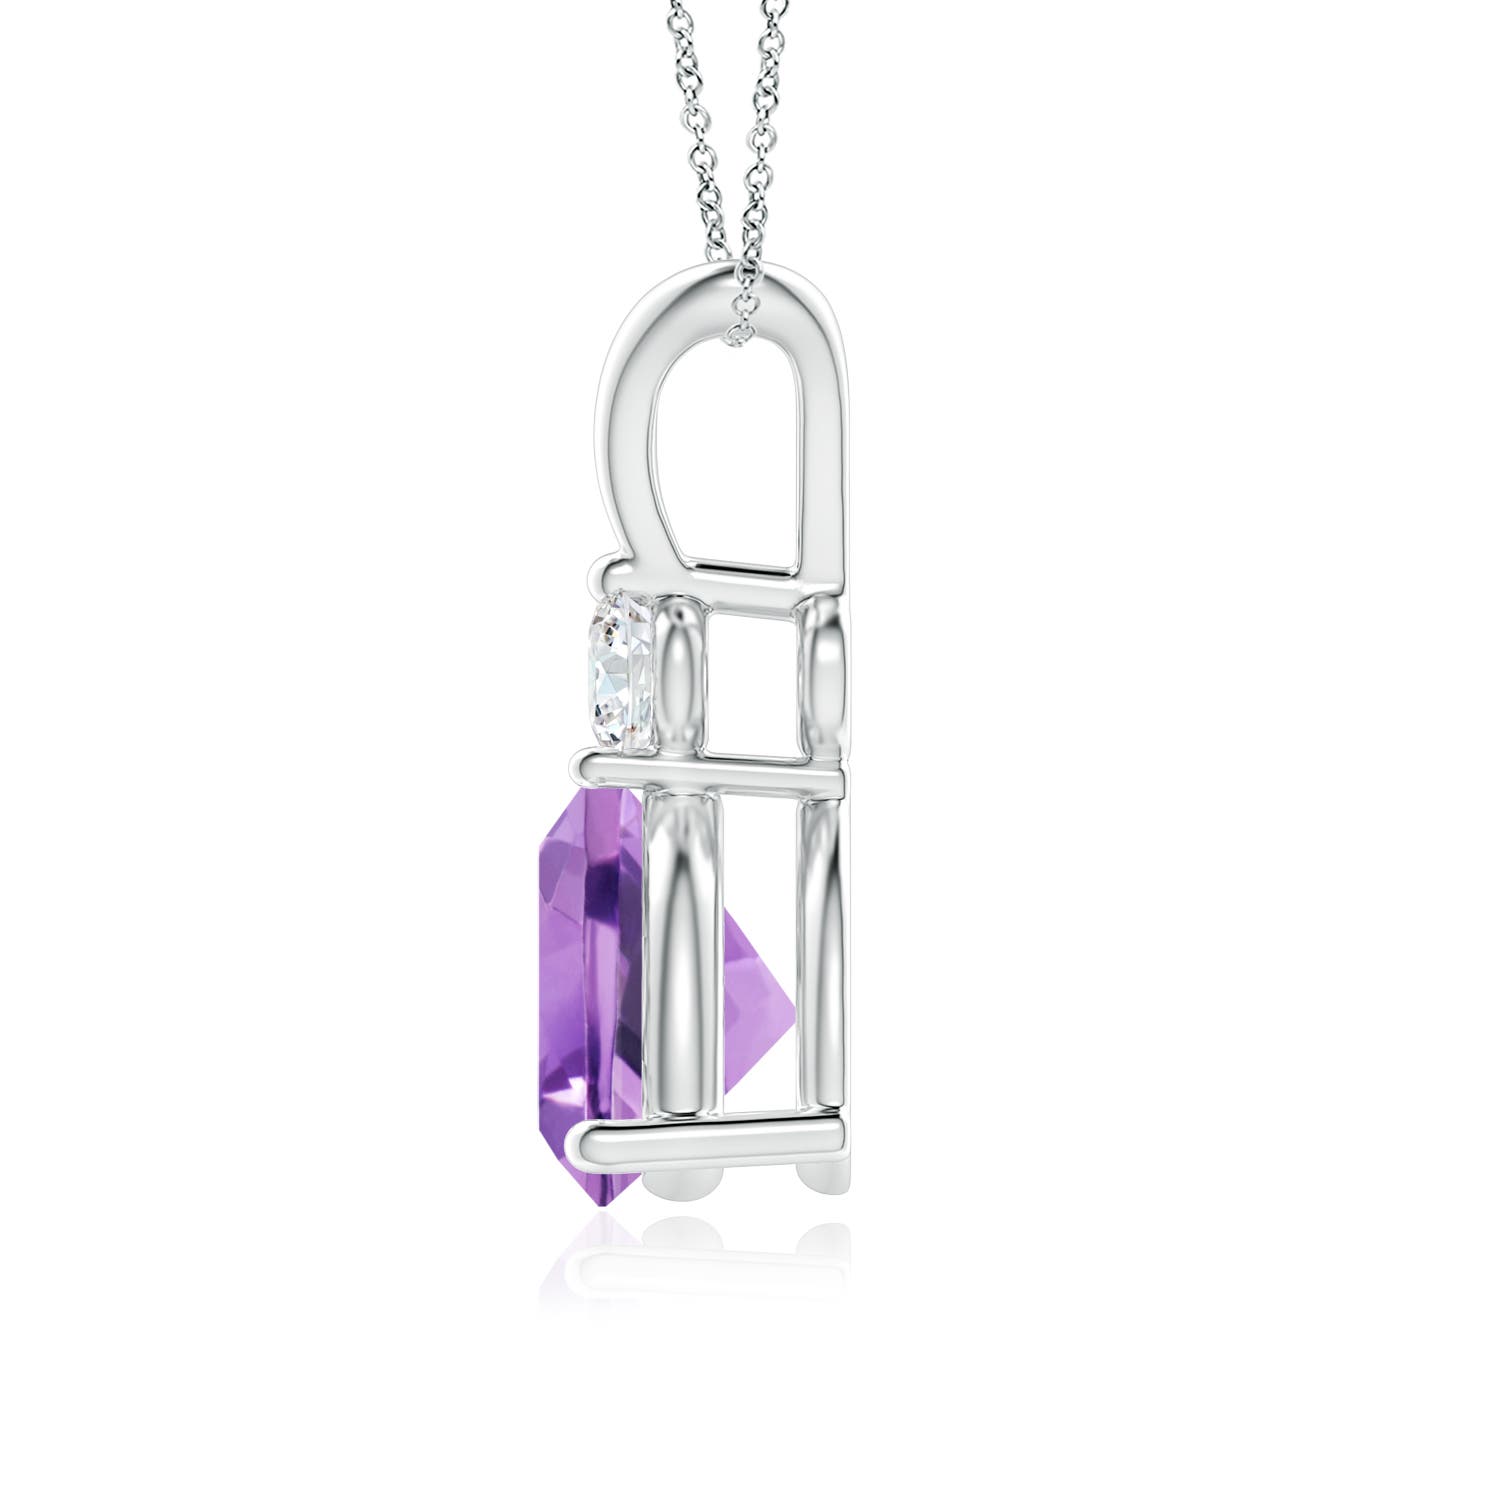 A - Amethyst / 1.21 CT / 14 KT White Gold